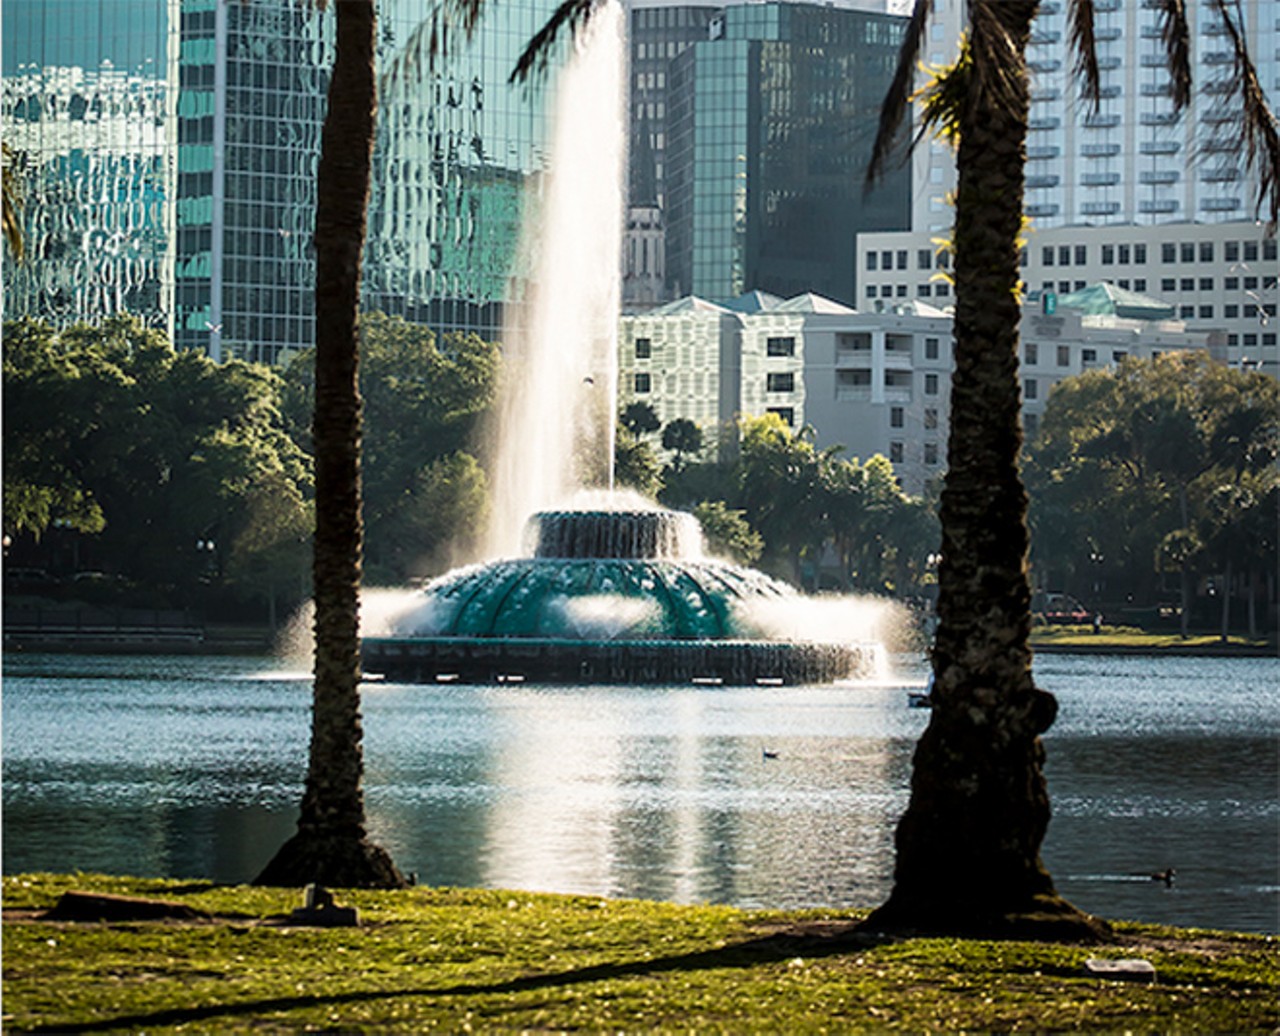 Sinkhole hiding under Lake Eola
Orlando's beloved Lake Eola started out as a sinkhole. It&#146;s deepest point is 80 feet. The fountain couldn&#146;t be placed directly in the center of the lake due to the sinkhole.
Photo by Rob Bartlett